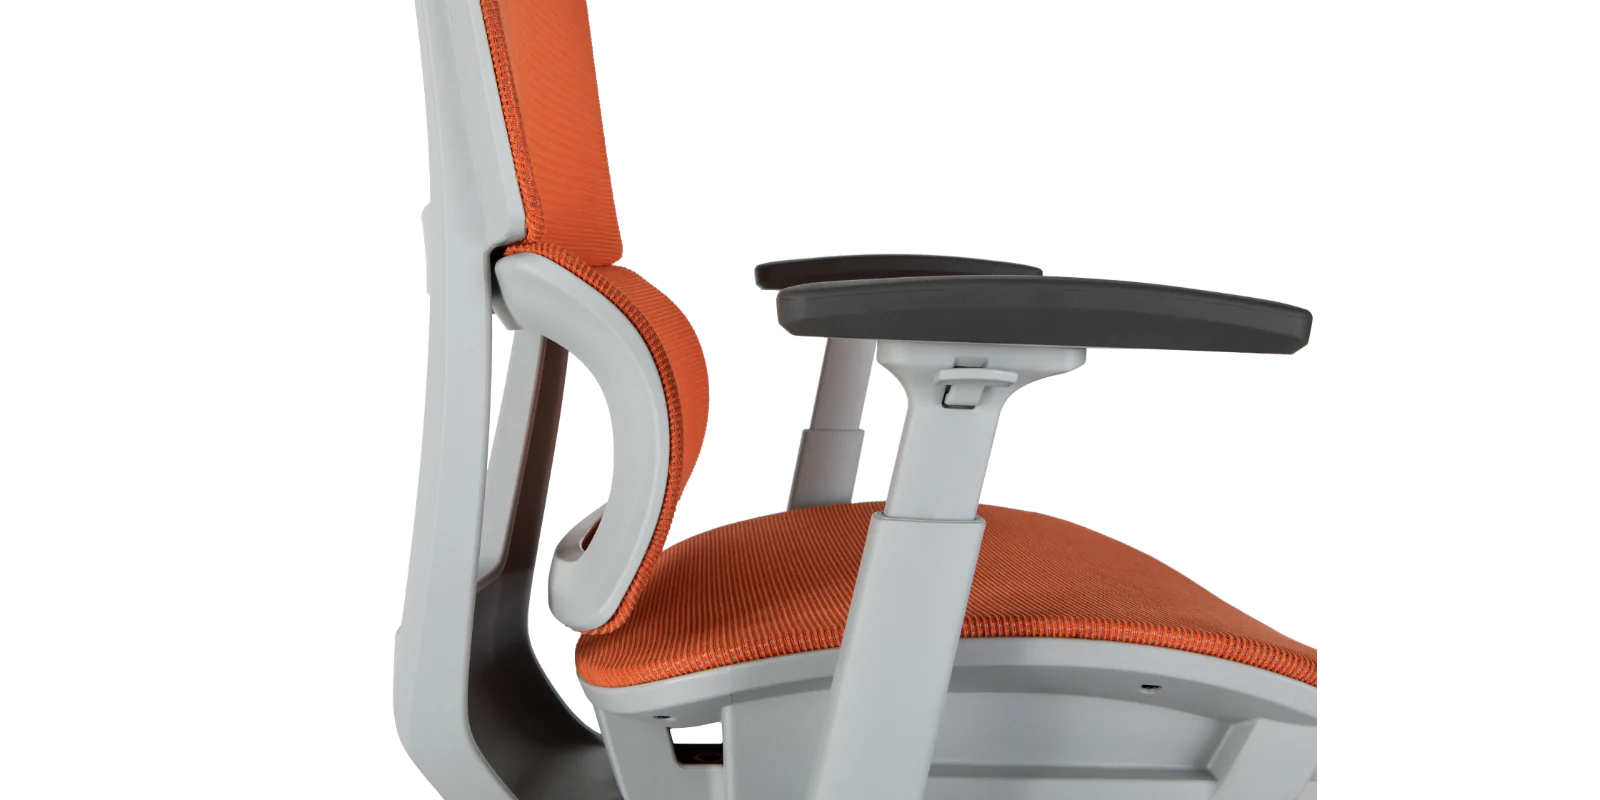 What office chair do chiropractors recommend?